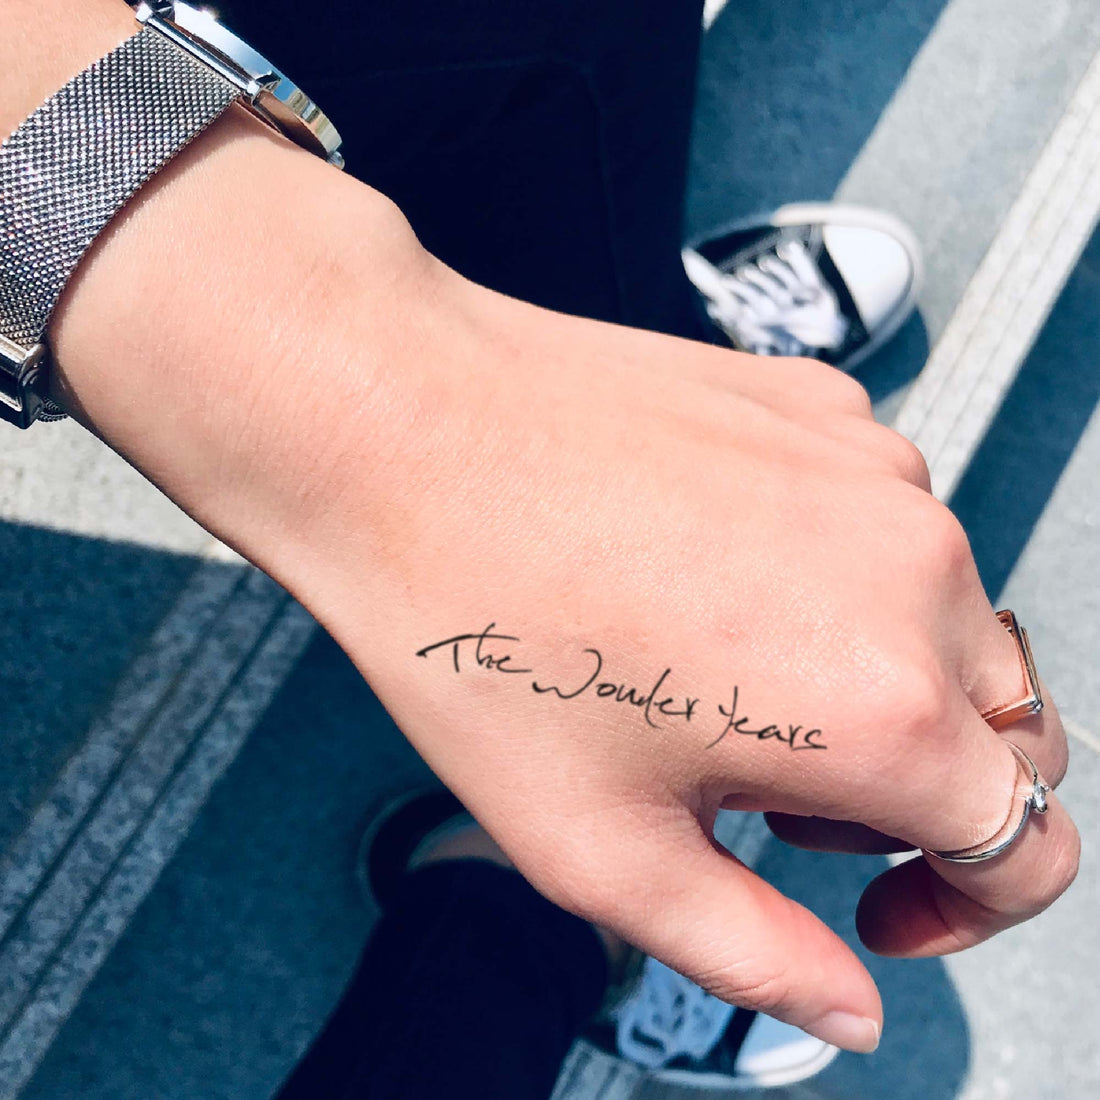 The Wonder Years custom temporary tattoo sticker design idea inspiration meanings removal arm wrist hand words font name signature calligraphy lyrics tour concert outfits merch accessory gift souvenir costumes wear dress up code